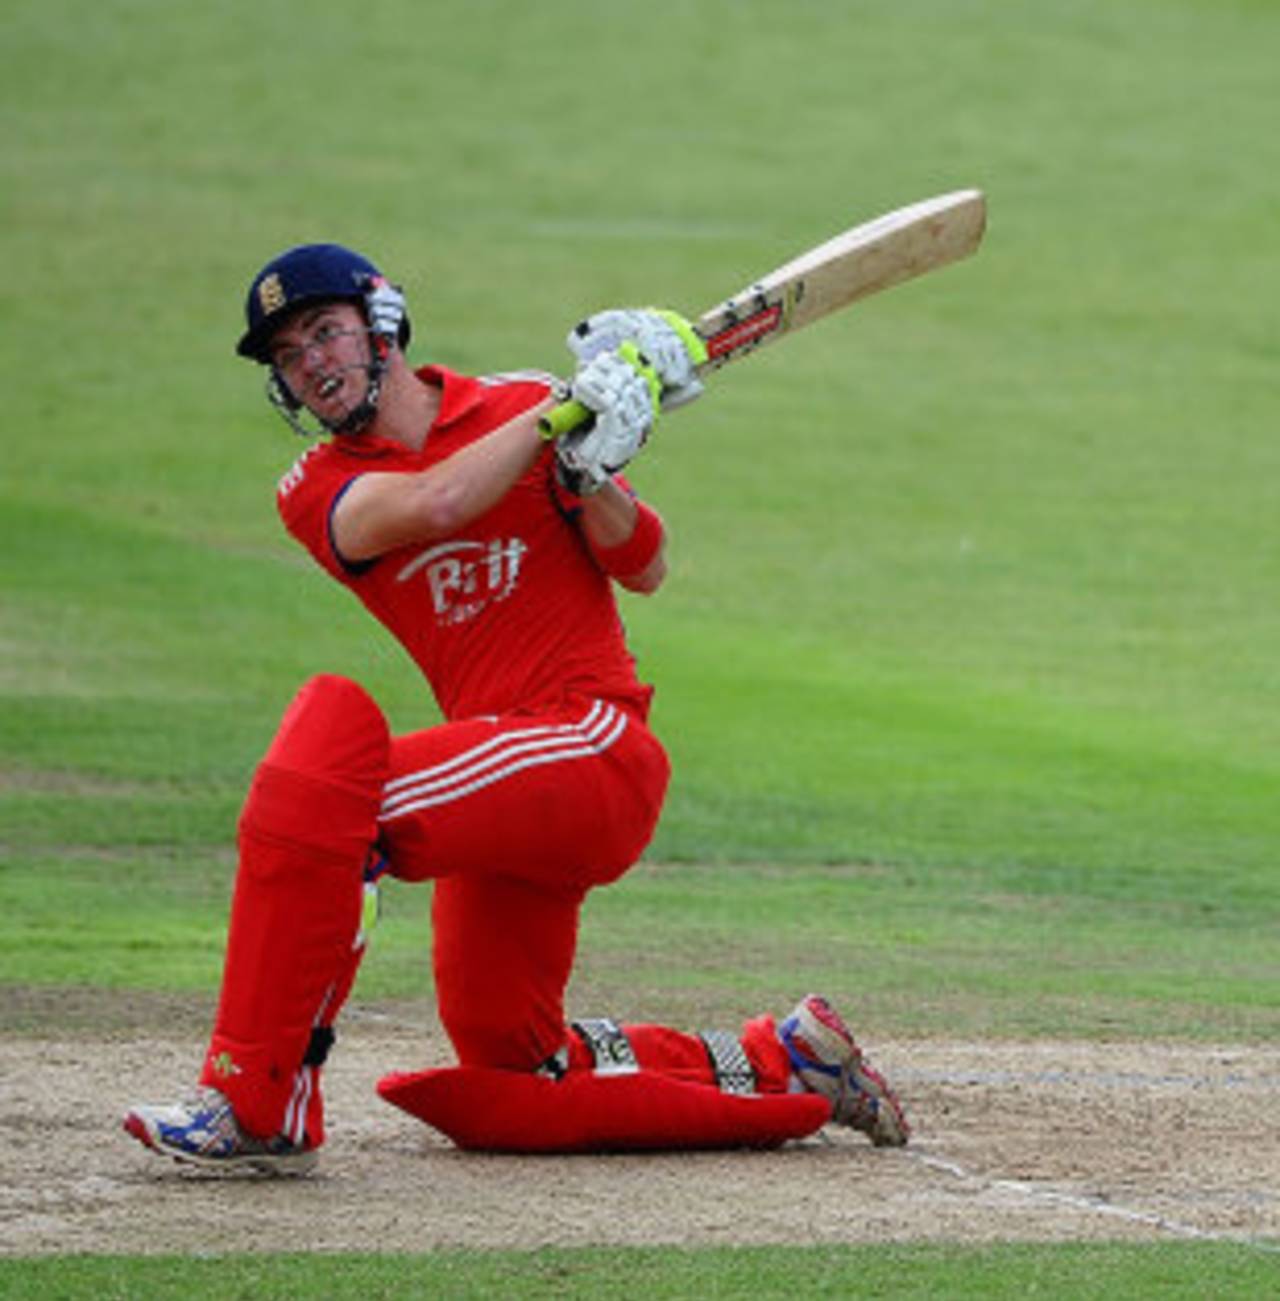 File photo - Ryan Higgins struck five fours and two sixes while scoring a 123-ball 83&nbsp;&nbsp;&bull;&nbsp;&nbsp;Getty Images